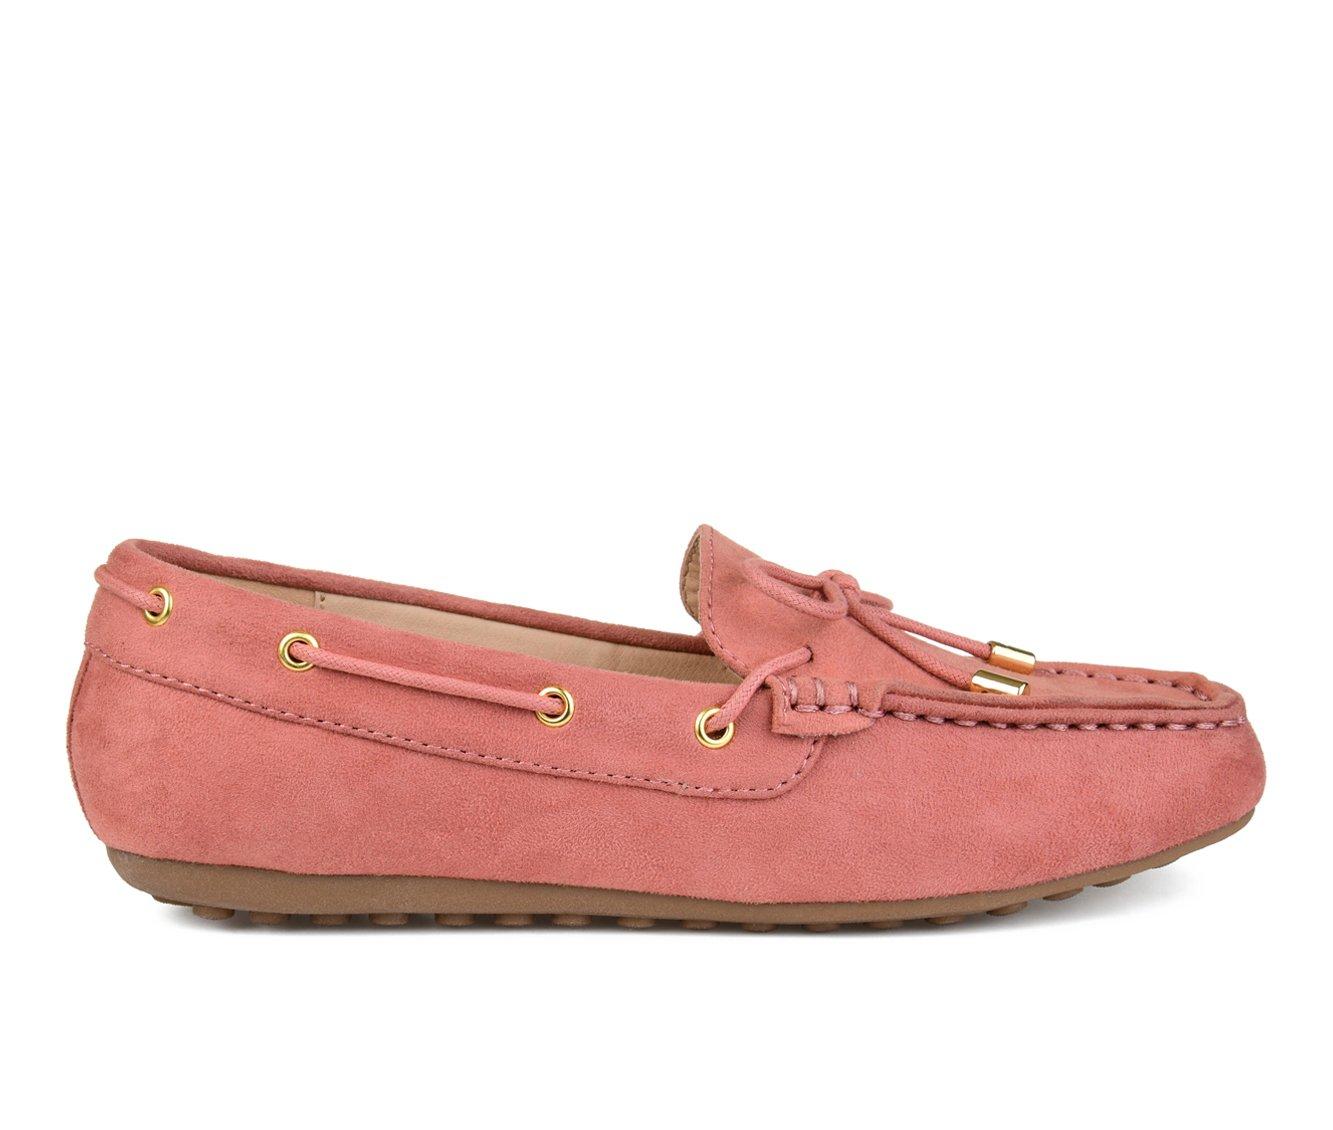 Women's Journee Collection Thatch Mocassin Loafers